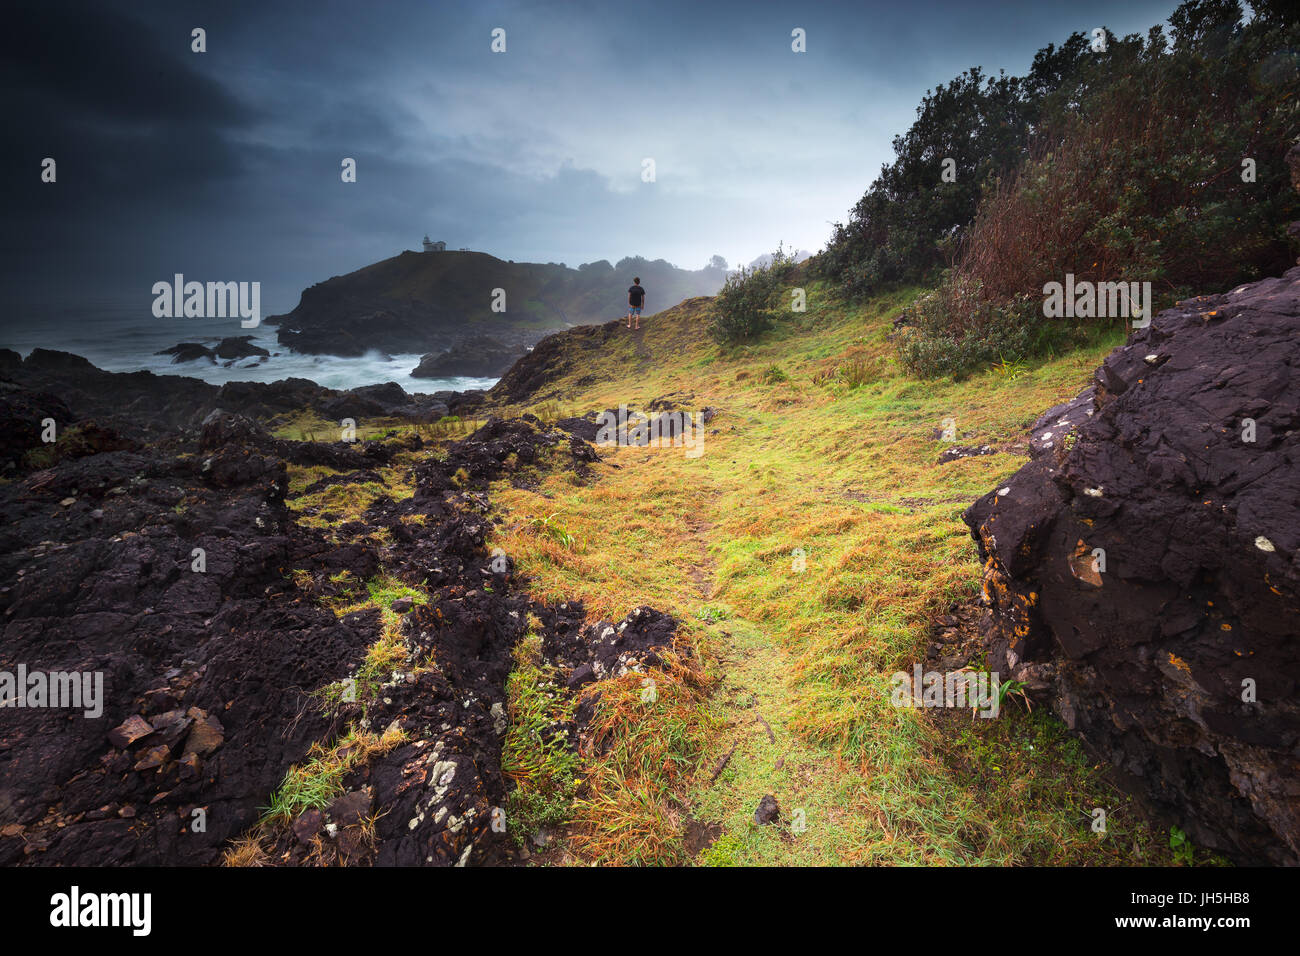 A person looks on as a dark moody storm moves over the rugged coastline that surrounds. Stock Photo